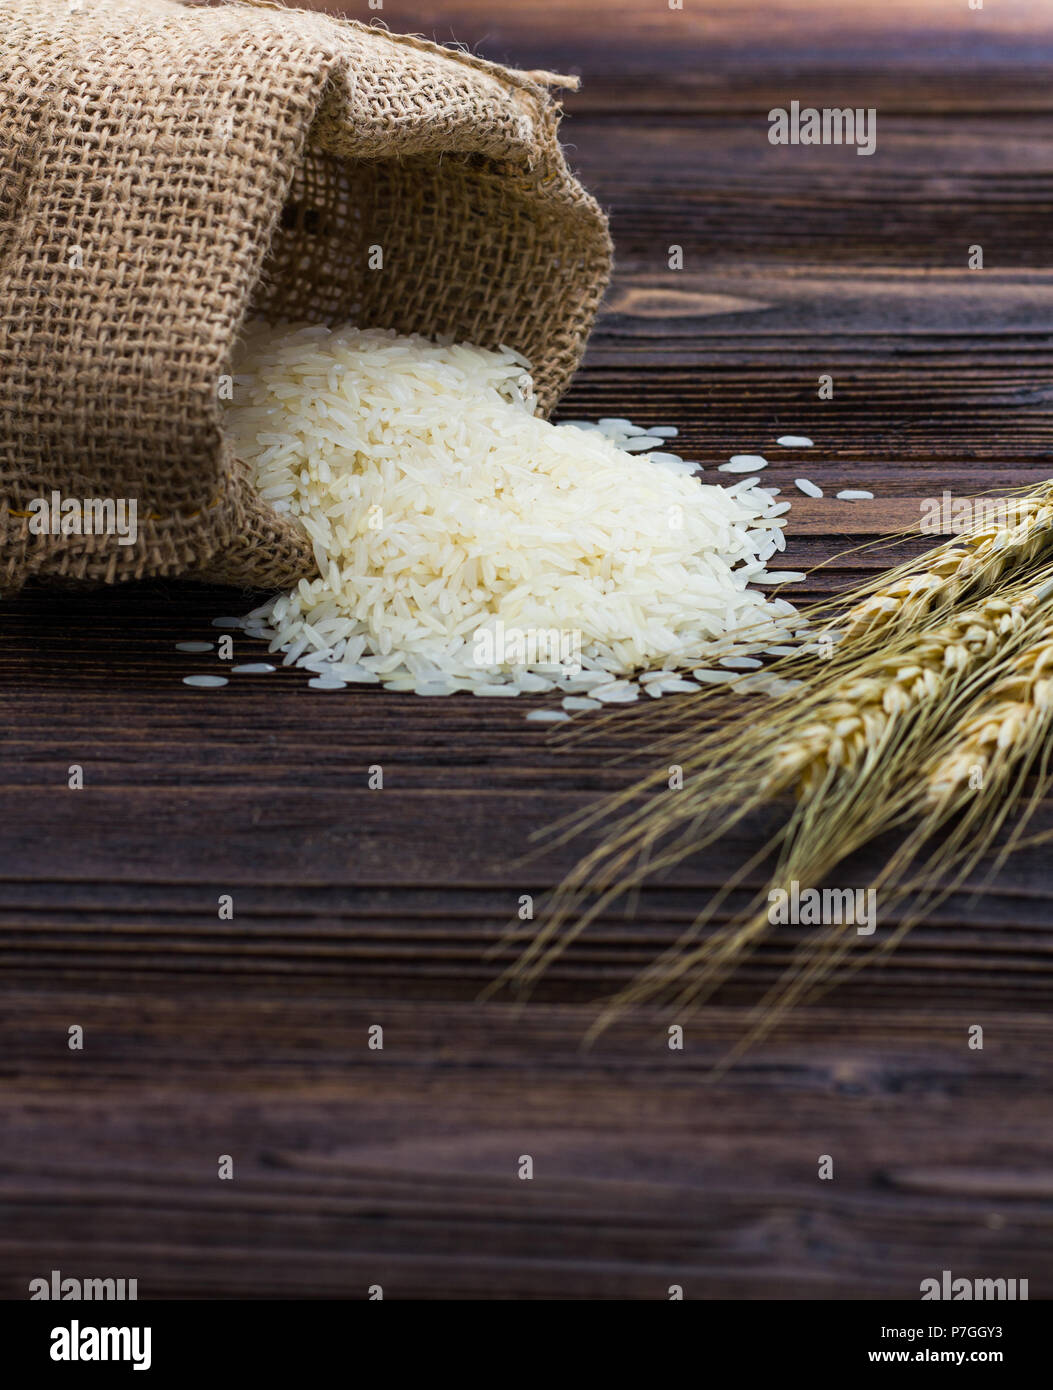 White rice in sack and ear of paddy on wooden table. Stock Photo